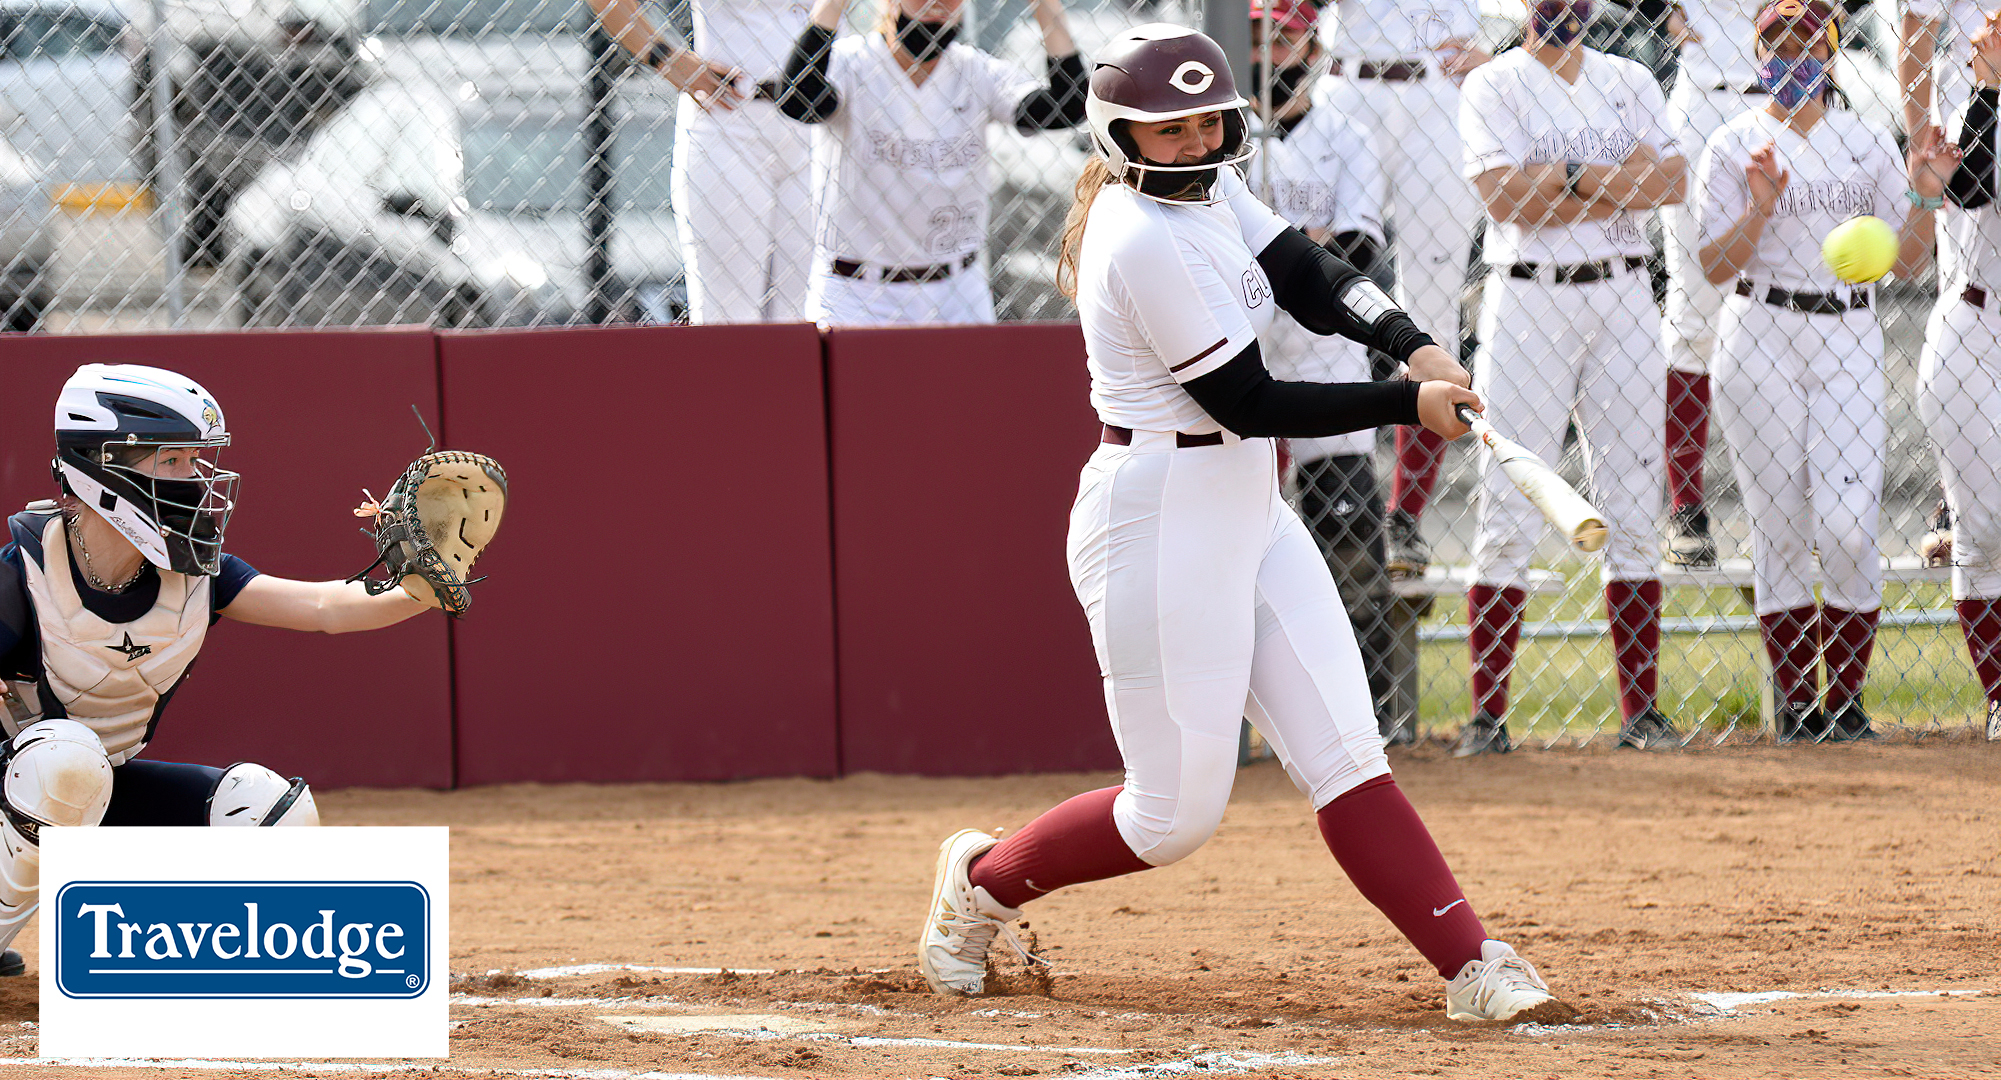 Junior Val Kolstad connects on a pitch and sends it over the fence for her fourth home run of the season in the Cobbers' first game against Carleton.